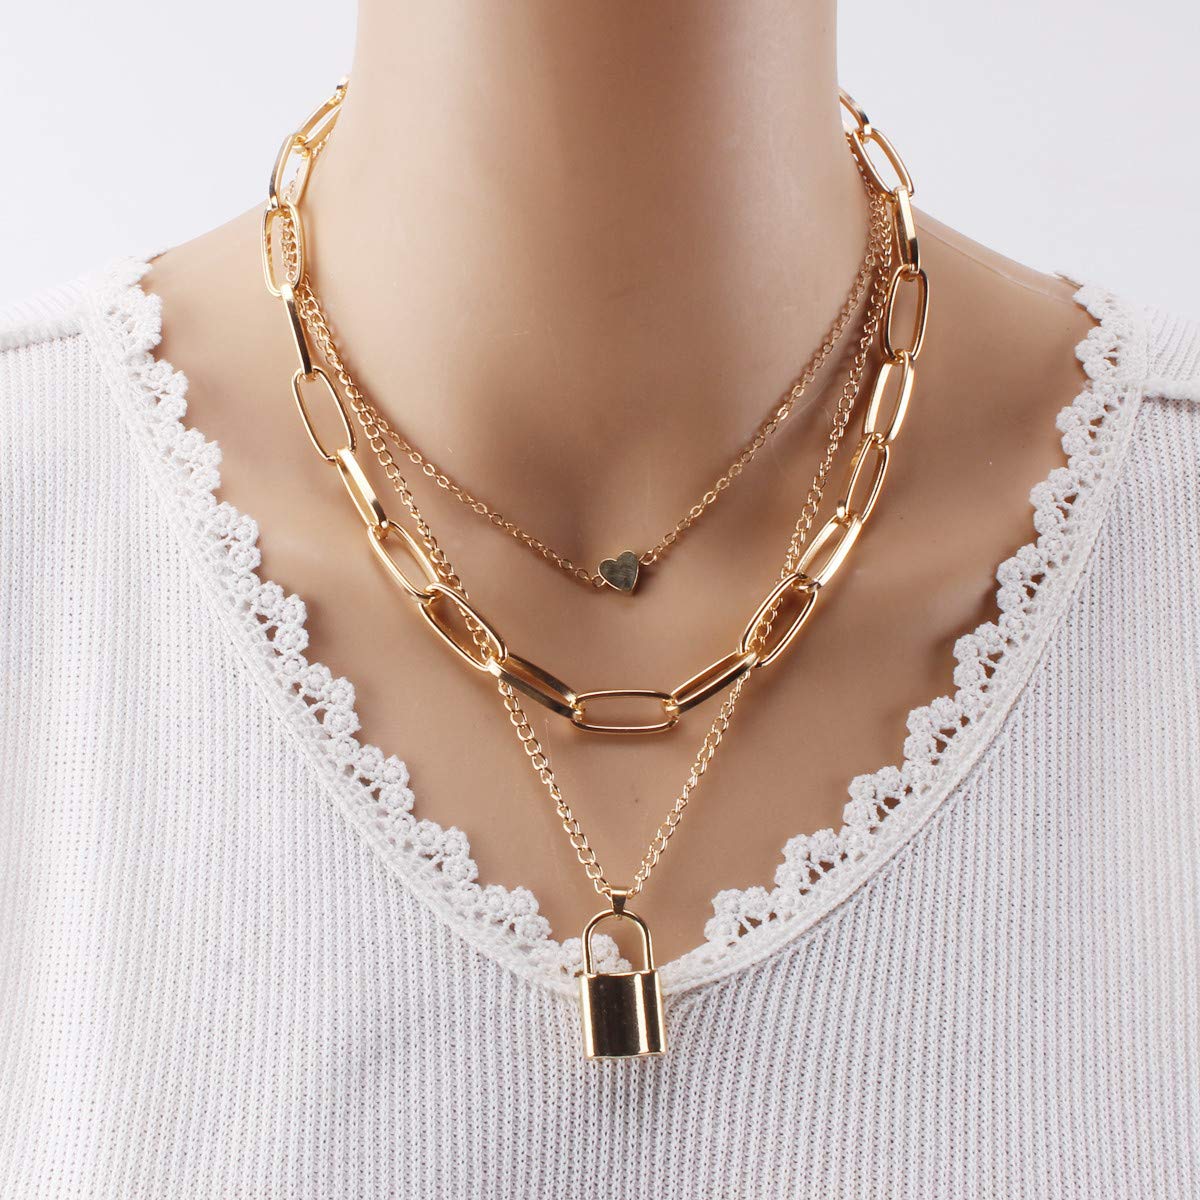 Yellow Chimes Layered Necklace for Women Chain Choker Necklace Gold-Plated Western Key Heat Locket Multi layered Chain Necklace for Women and Girls